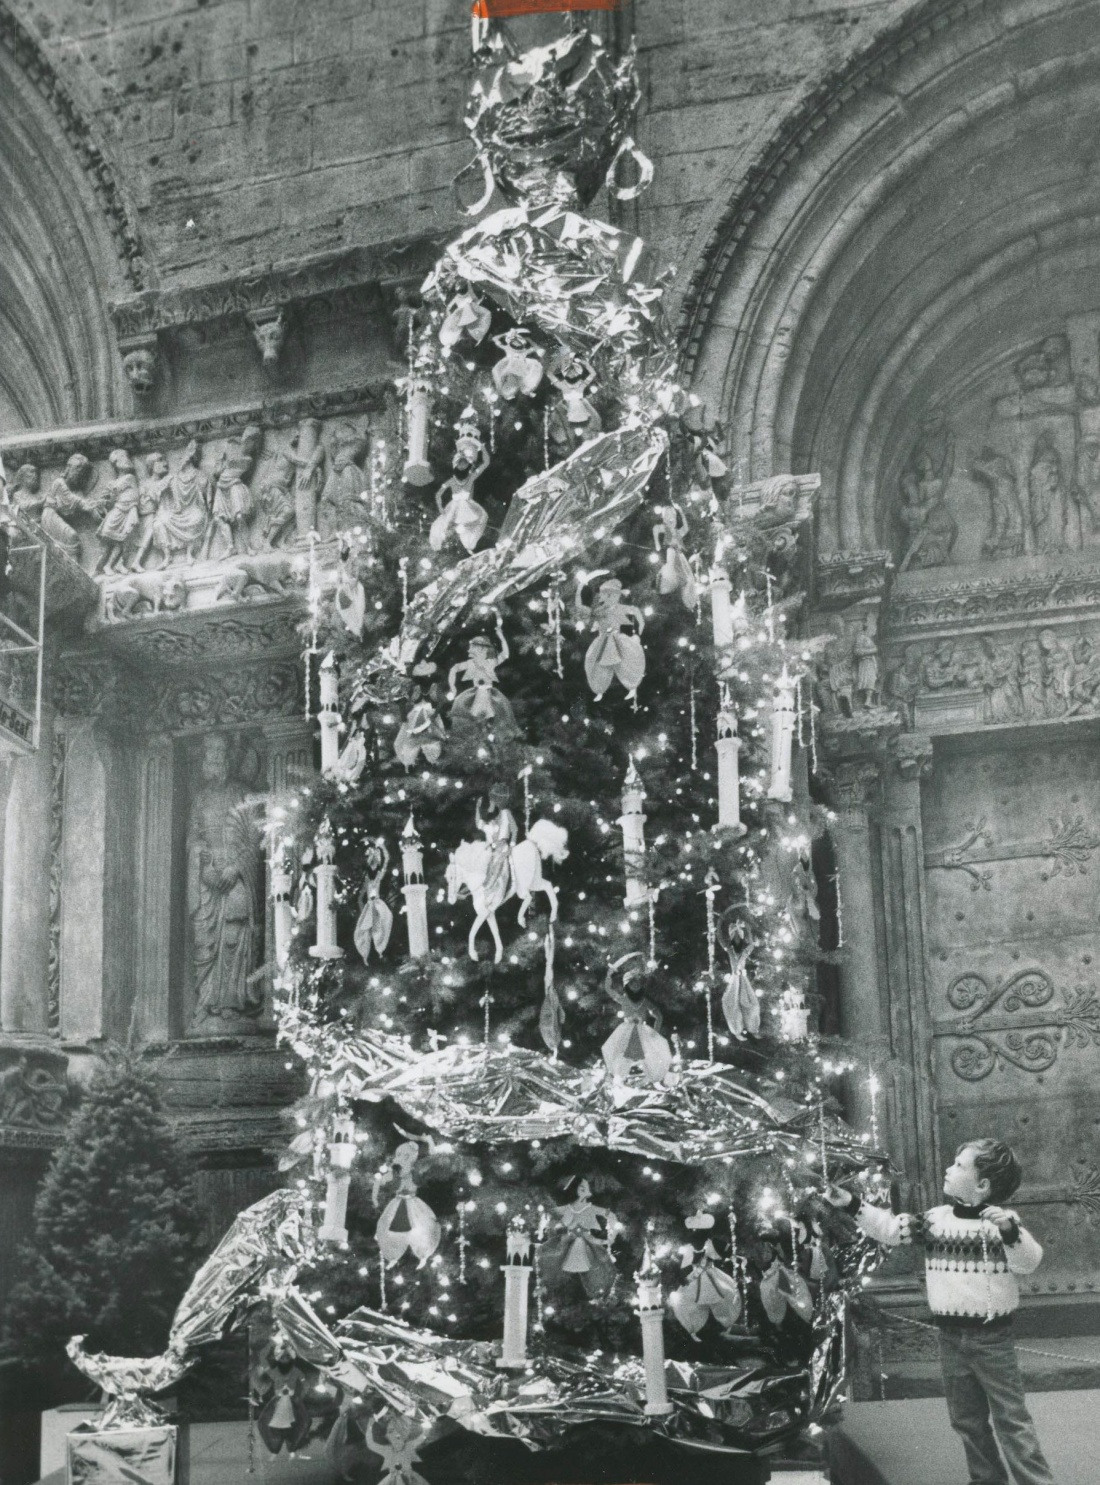 A black and white photo of a small child standing by alarge decorated Christmas tree.